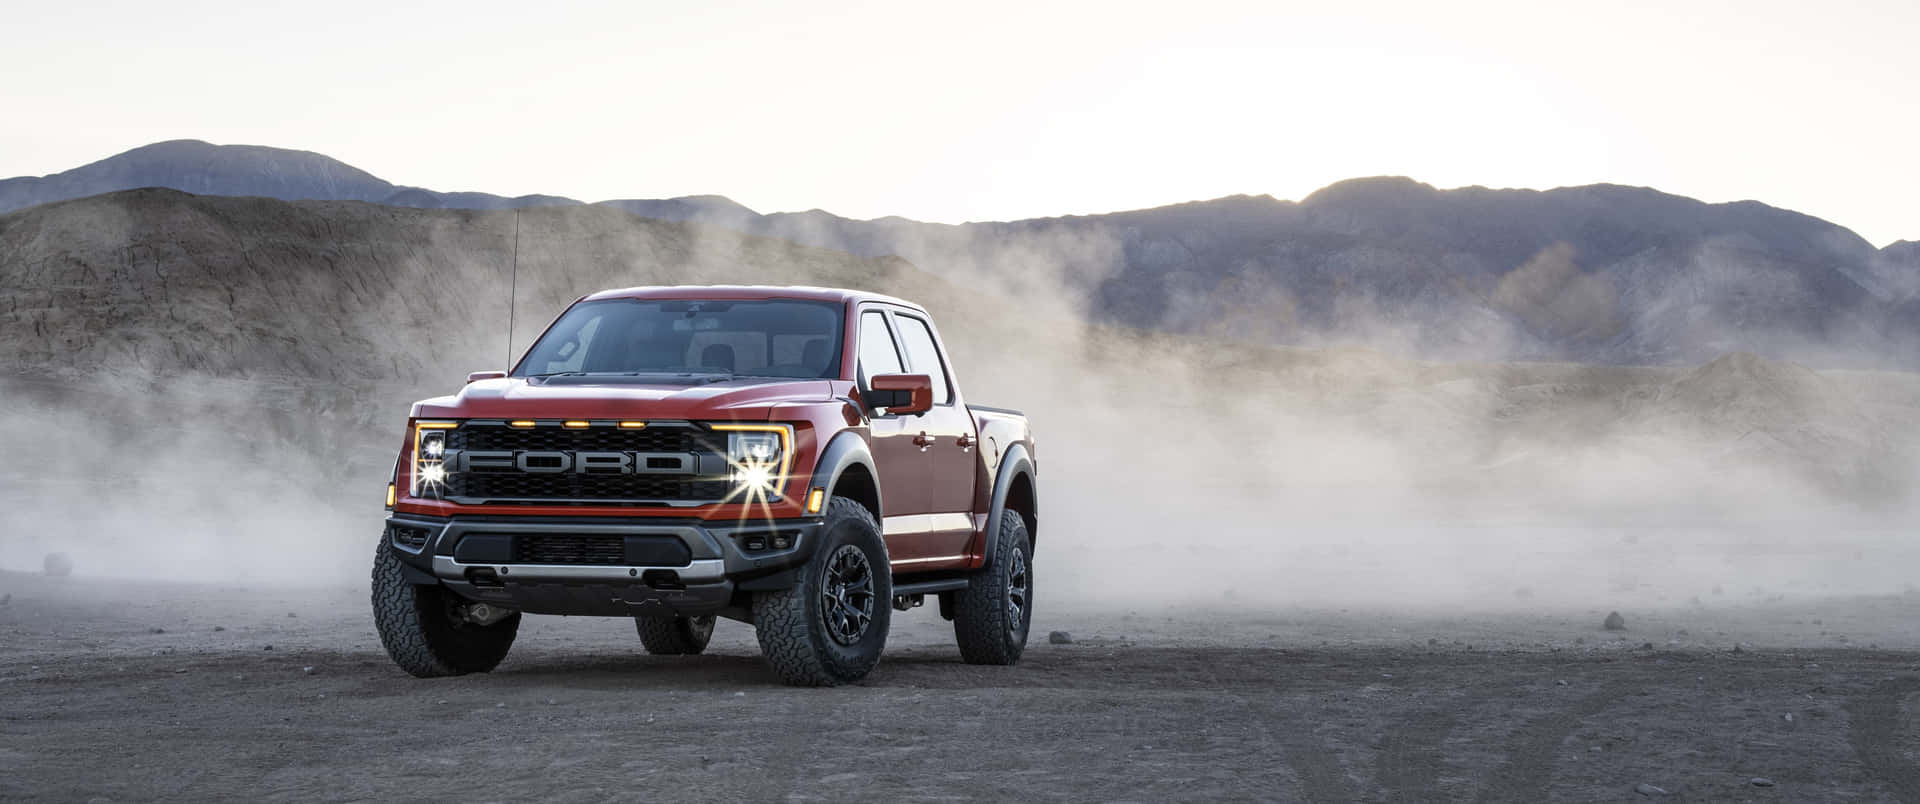 The 2020 Ford F-150 Raptor Is Driving Through The Desert